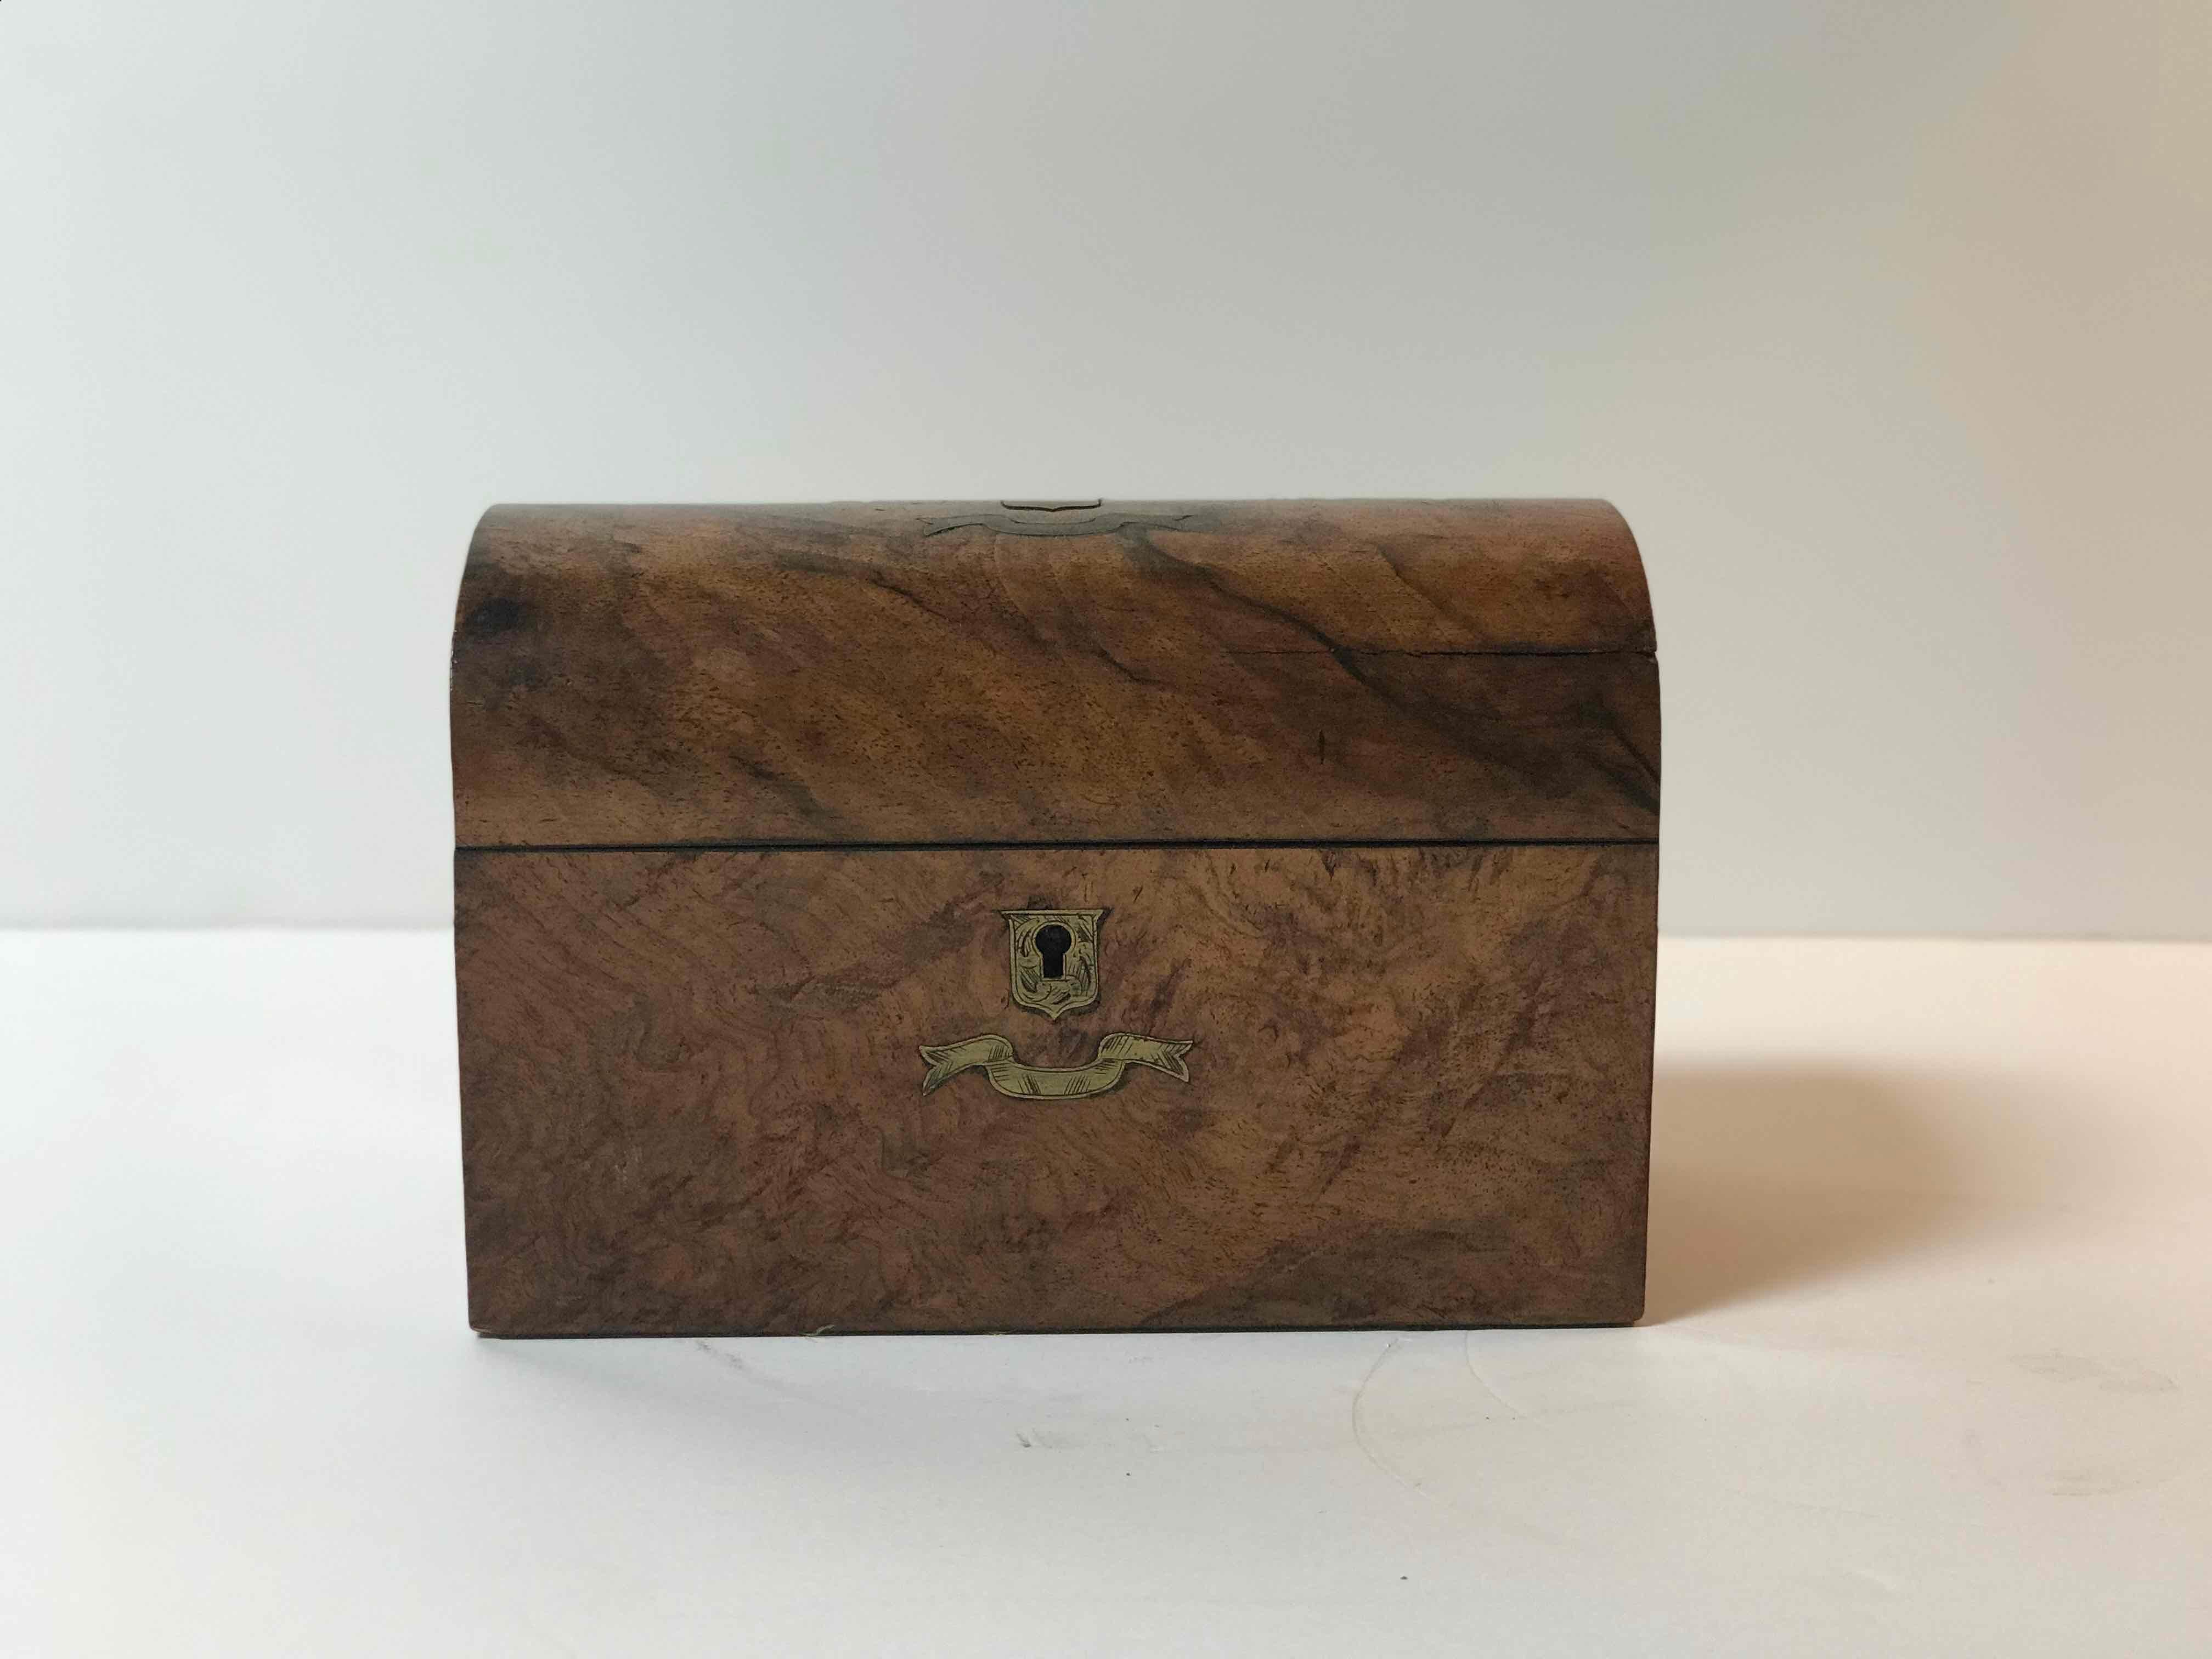 19th century domed tea caddy box with brass inlay from England. 